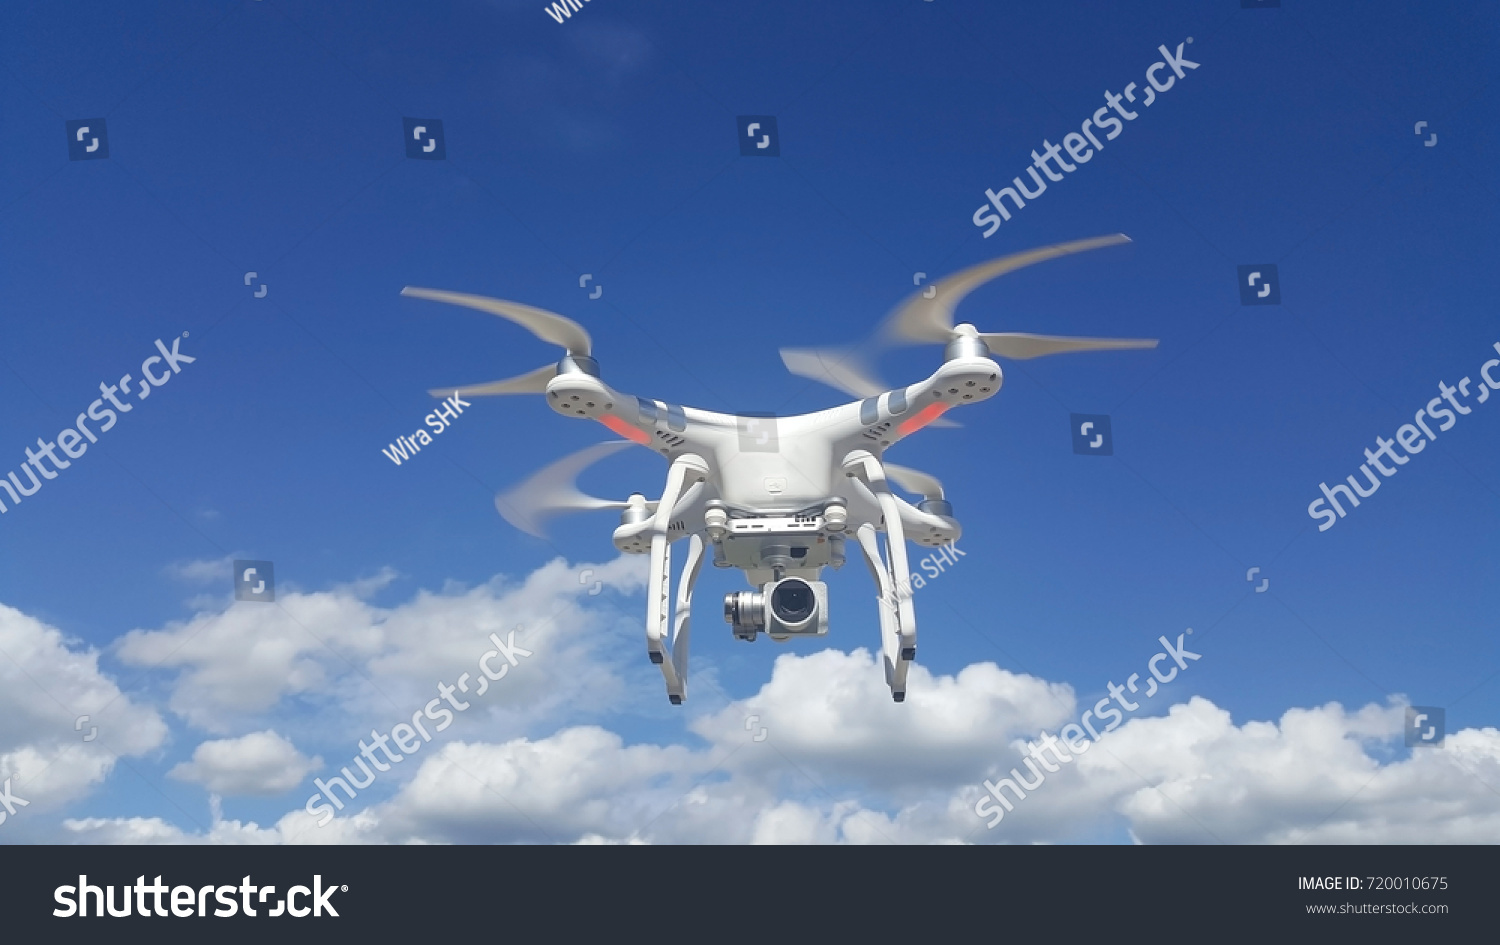 Flying drone with blue sky and clouds background #720010675